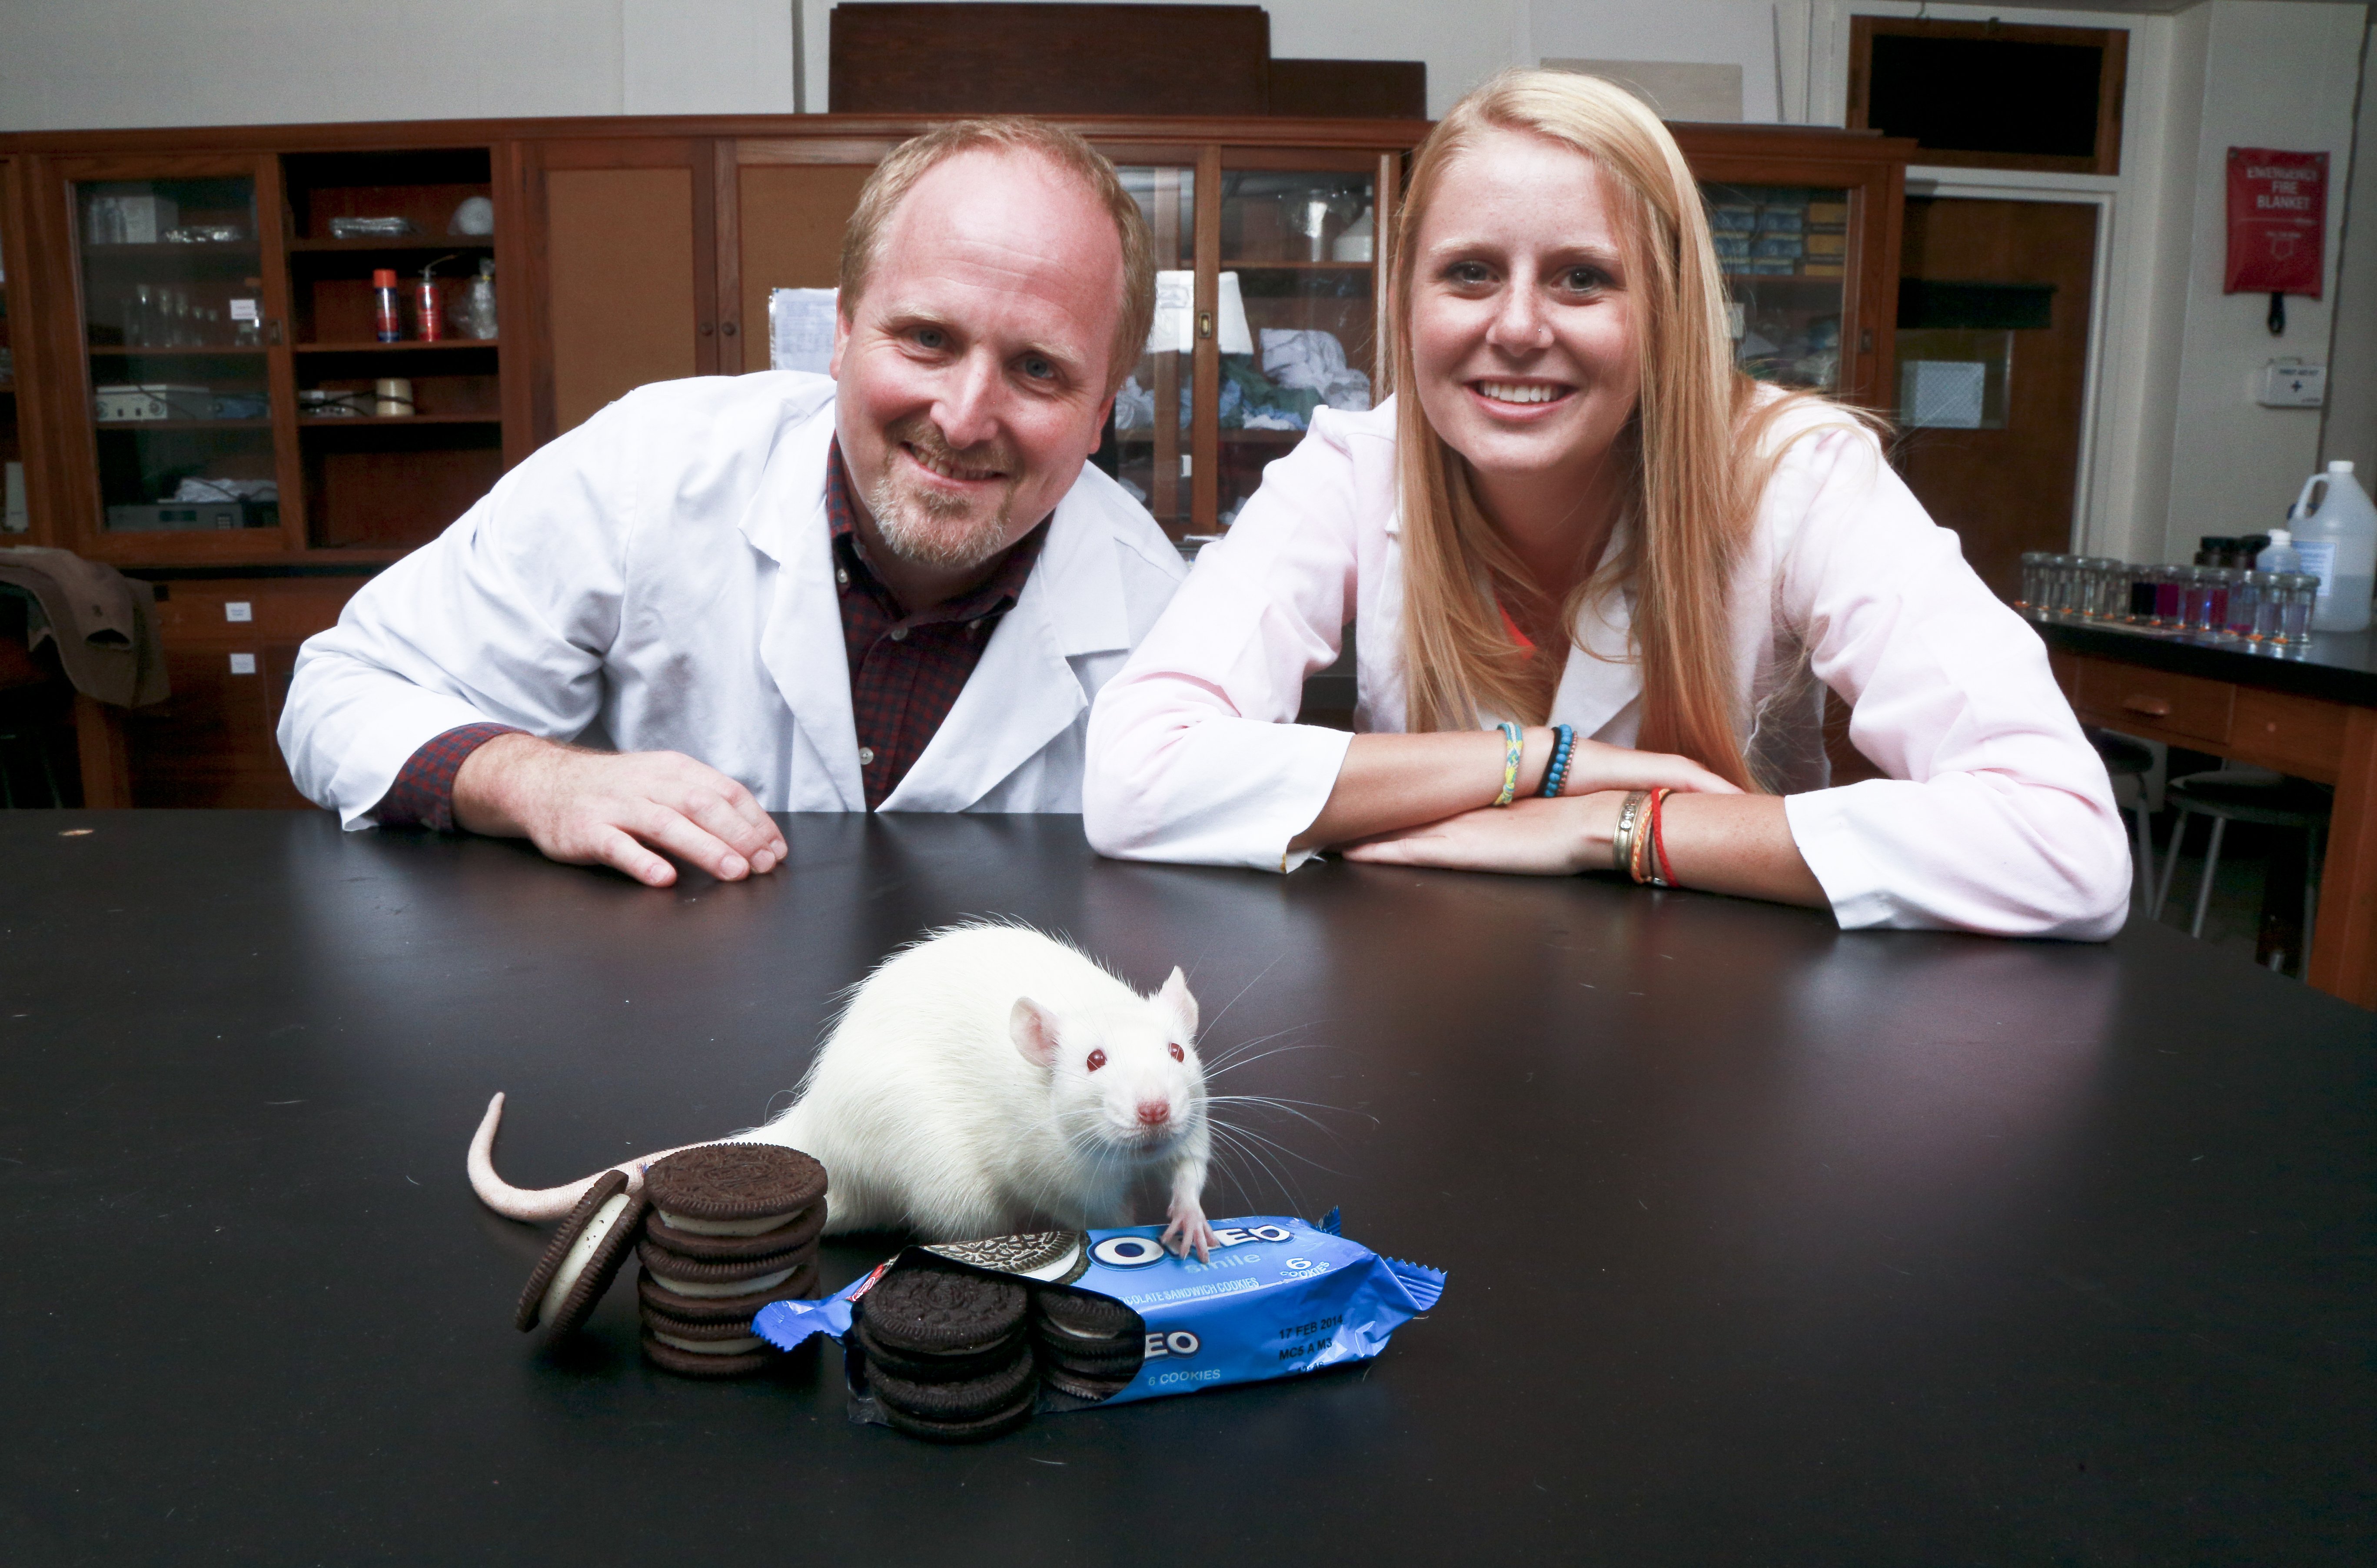 Connecticut College: Oreos are just as addictive as drugs in lab rats